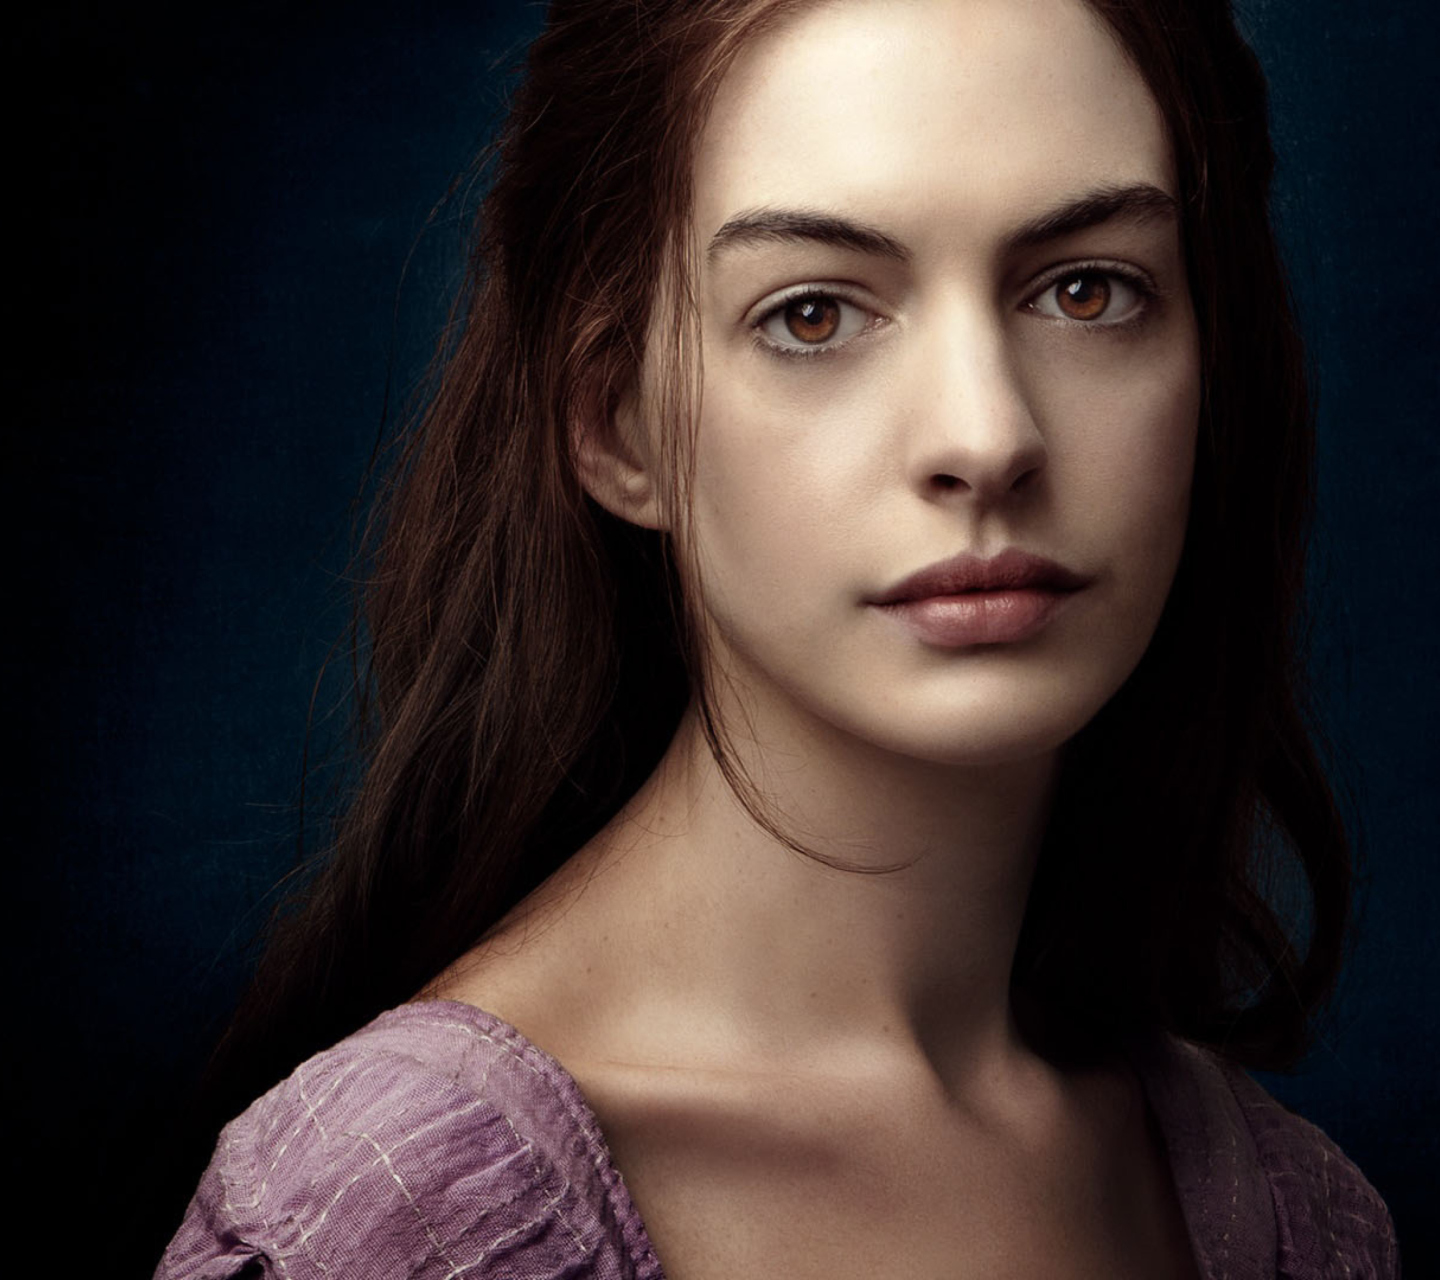 Anne Hathaway In Les Miserables screenshot #1 1440x1280